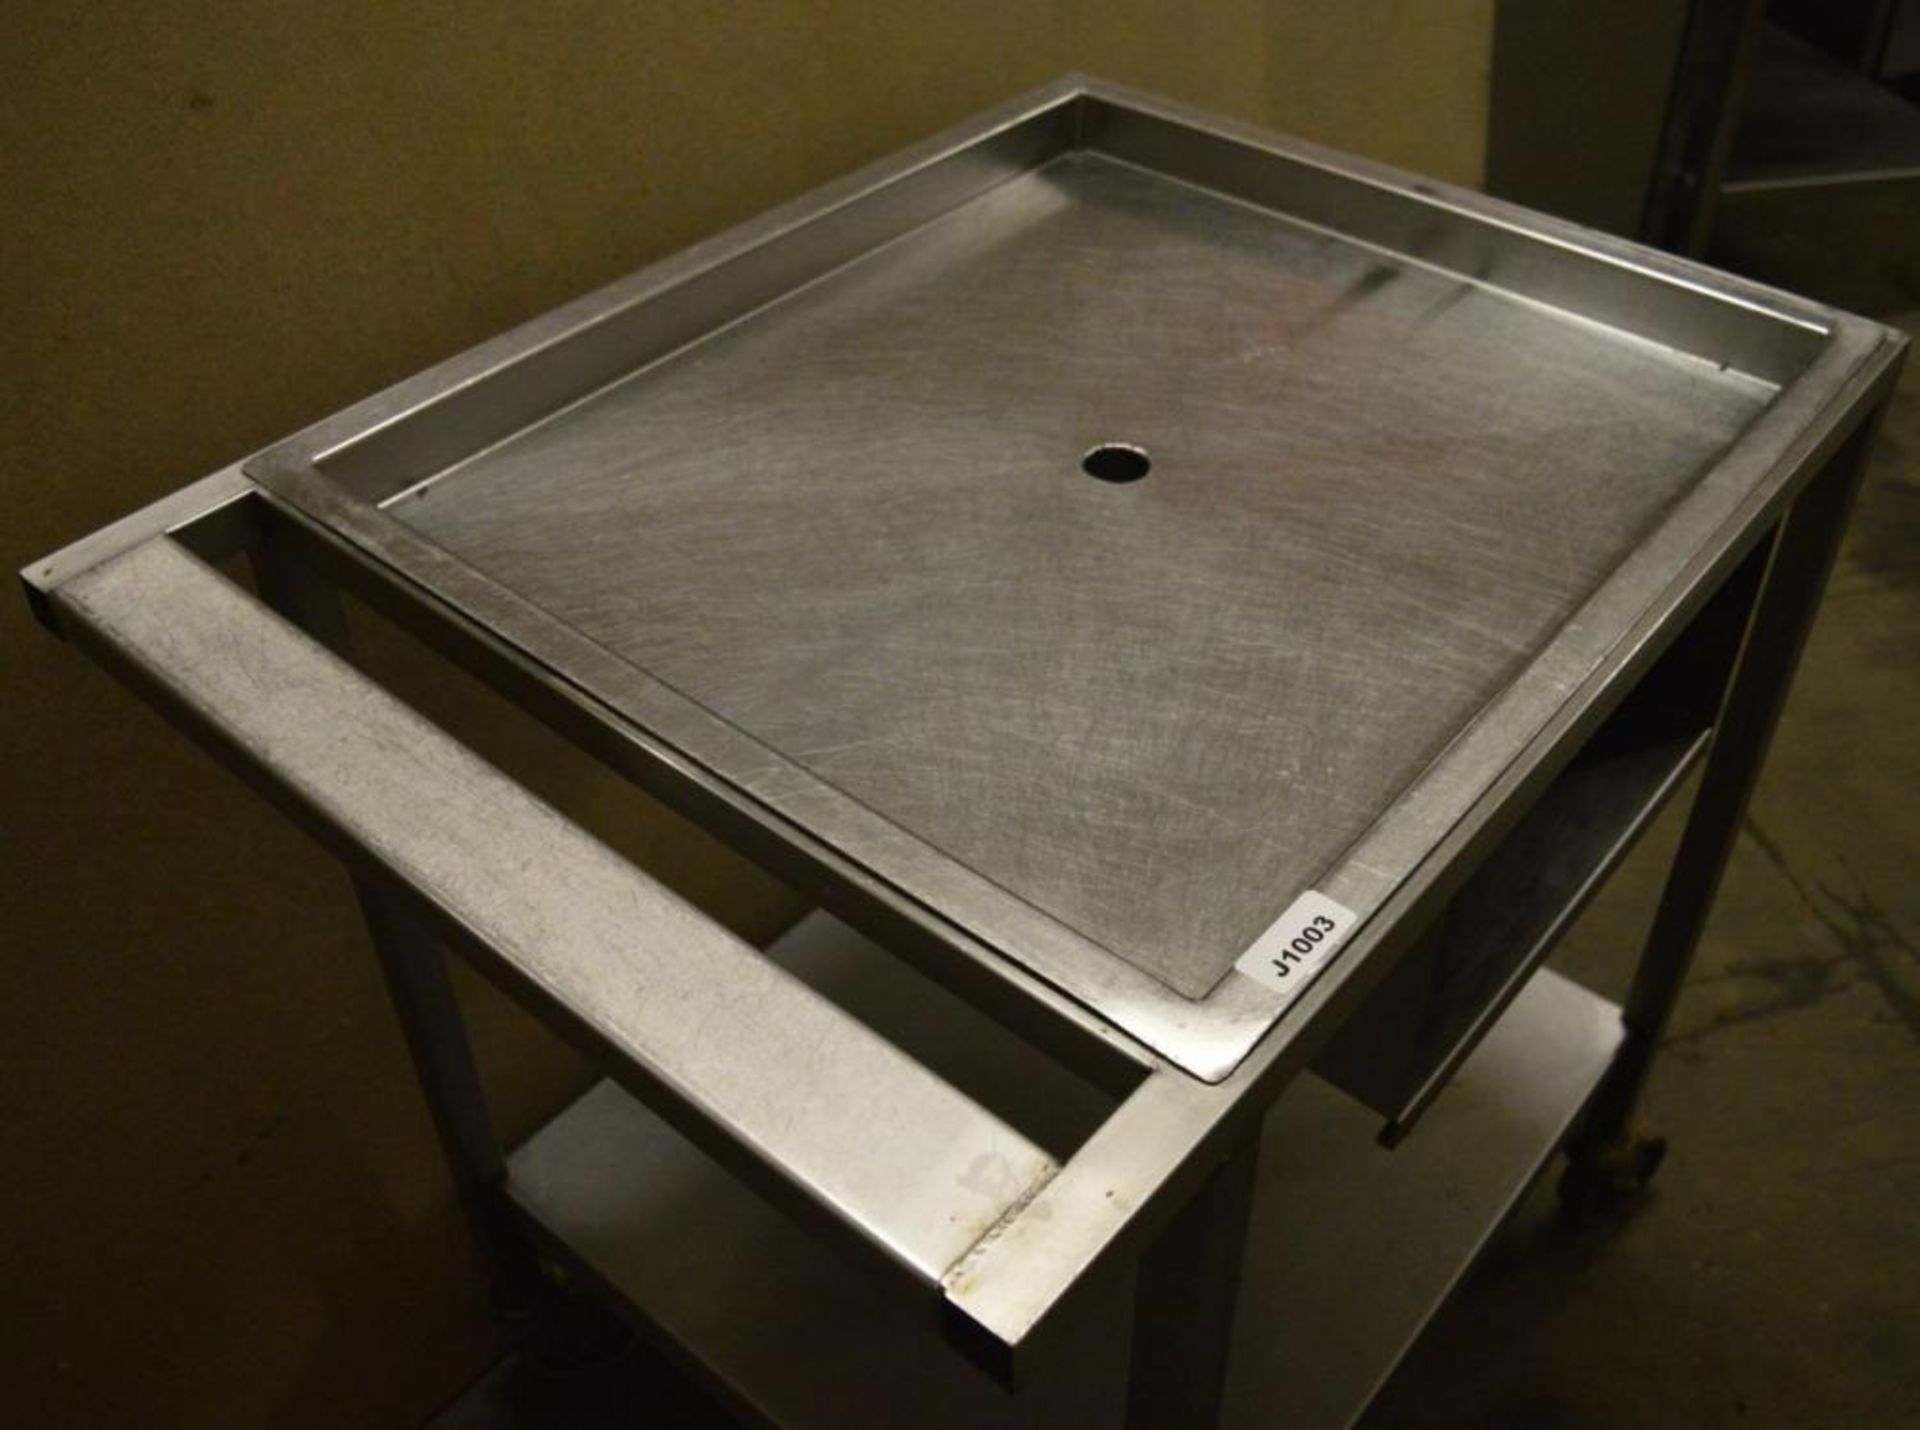 1 x Wheeled Stainless Steel Prep Bench with Drain Hole - Dimensions: 81.5 x 60.5 x 88cm - Ref: J1003 - Image 2 of 4